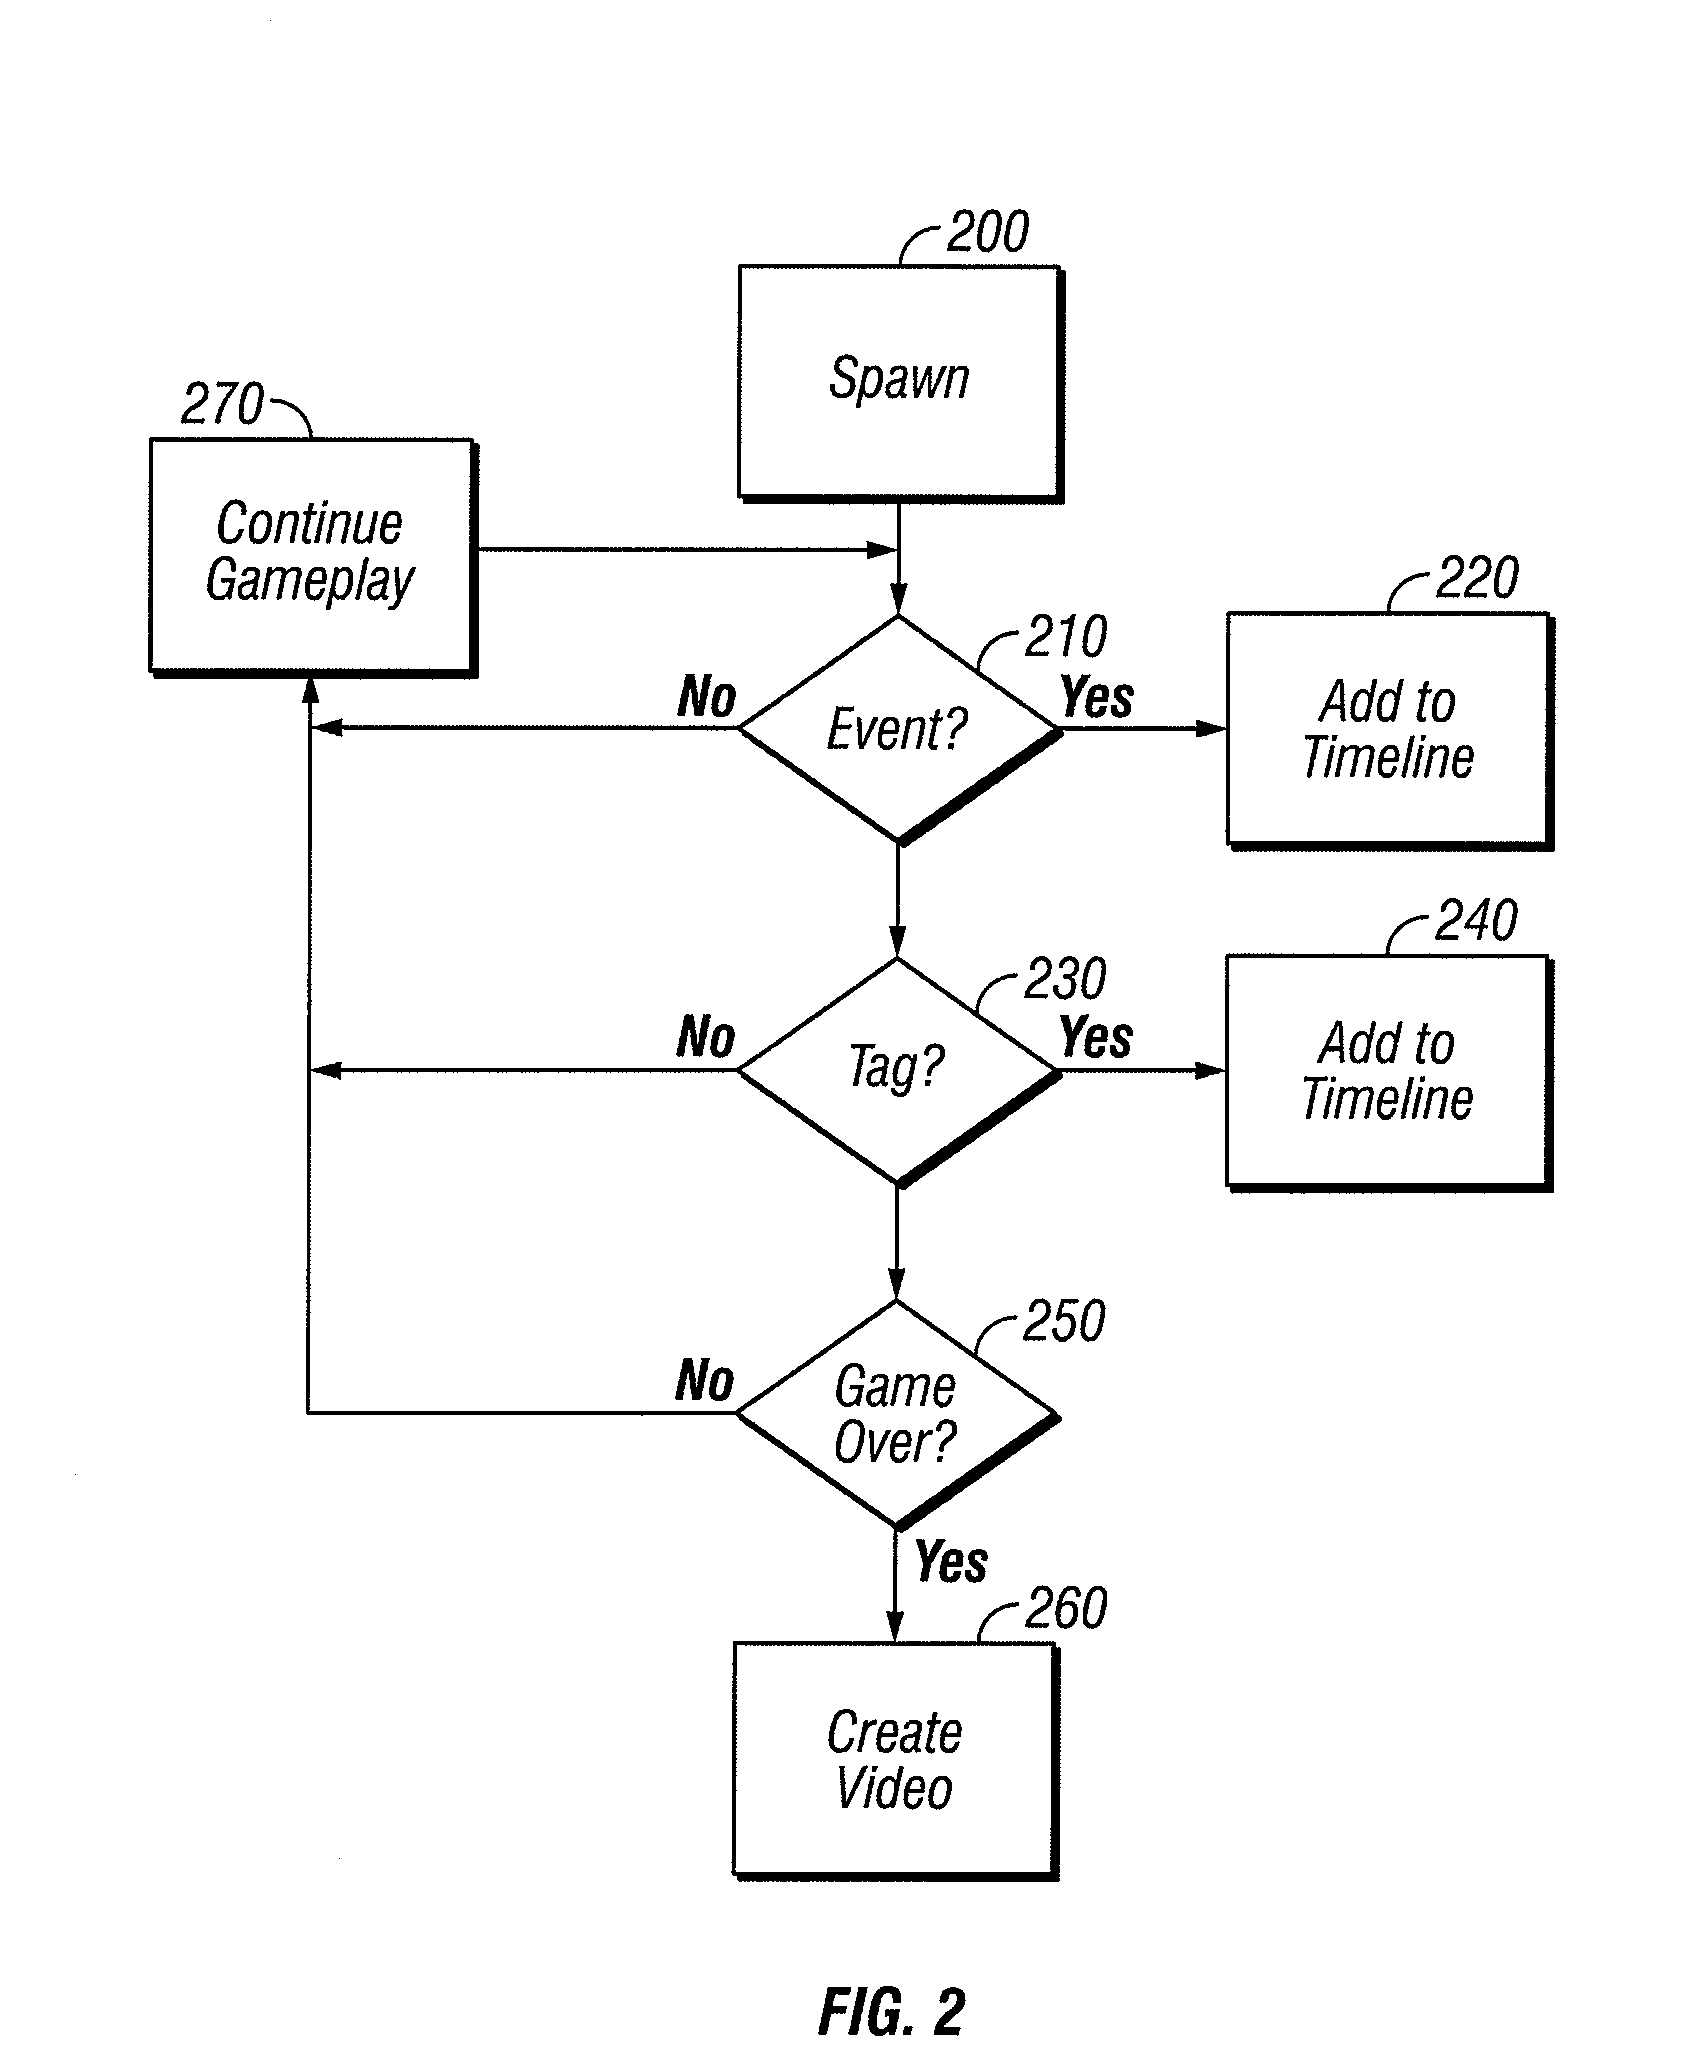 System and Method for Automated Creation of Video Game Highlights